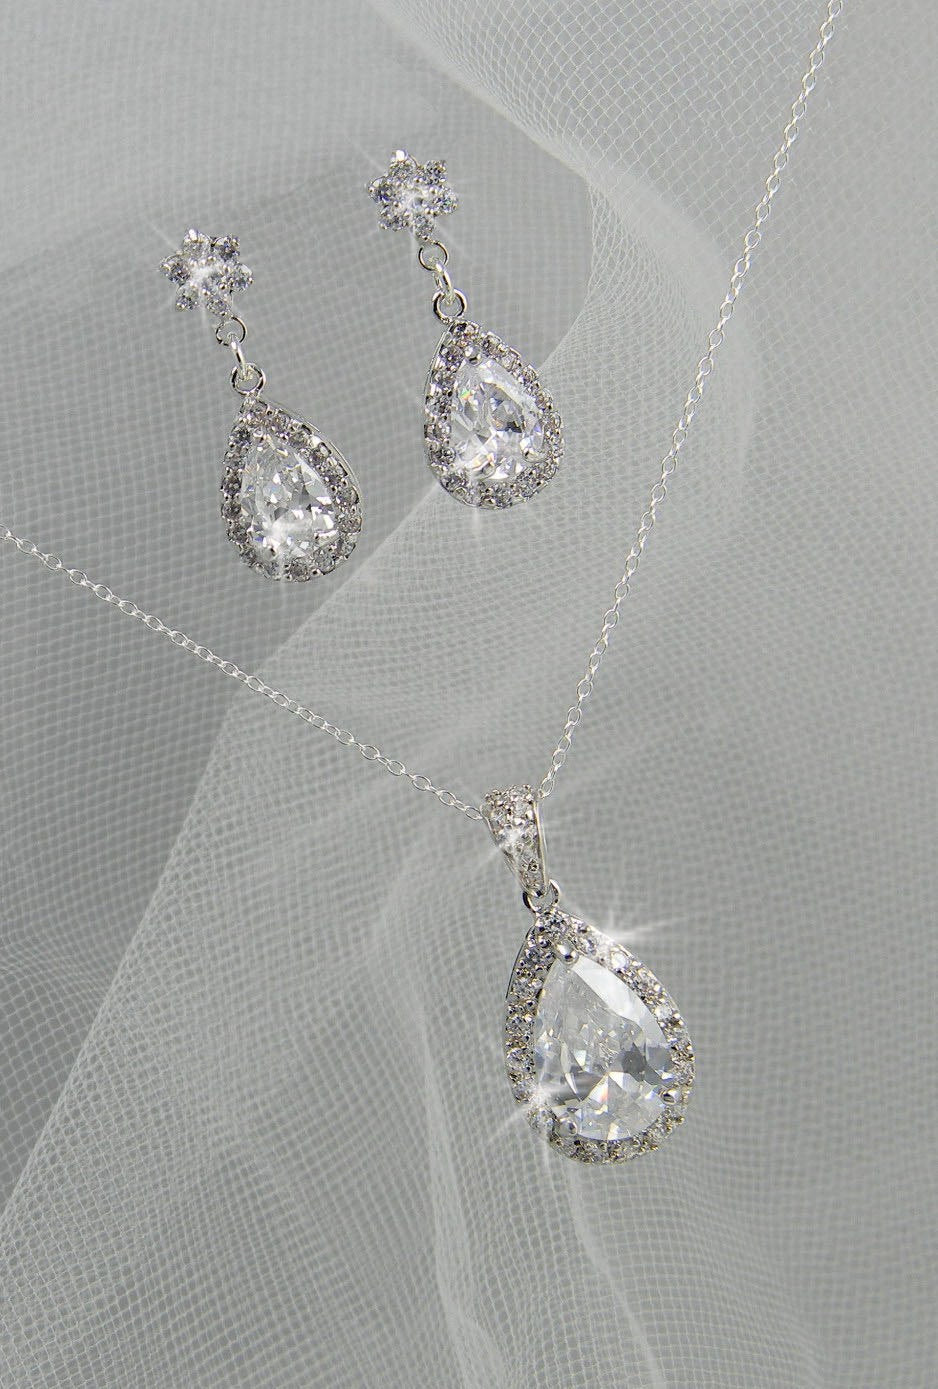 Bridal Party Jewelry Sets
 Crystal Bridal Set Bridesmaids Jewelry Set by CrystalAvenues